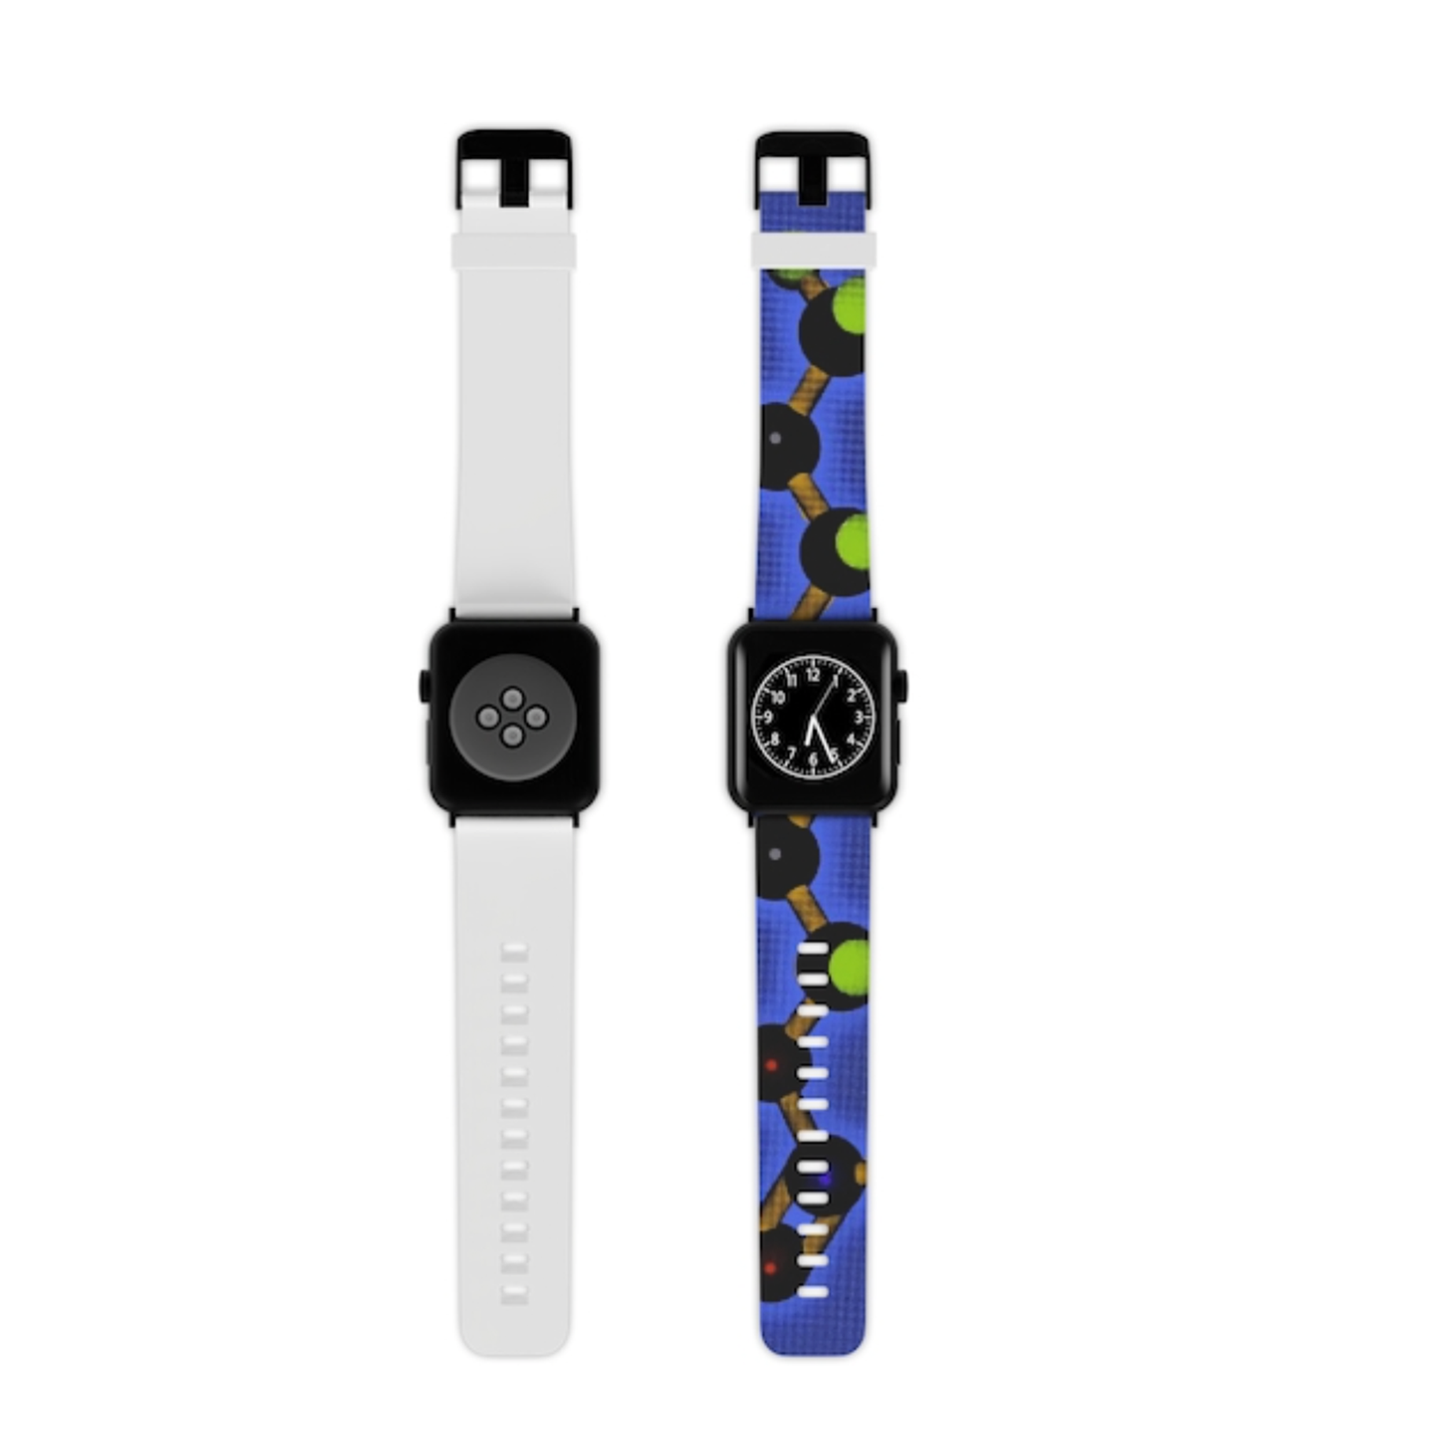 Chemical Couture: Poppers Pop Art Apple Watch Band